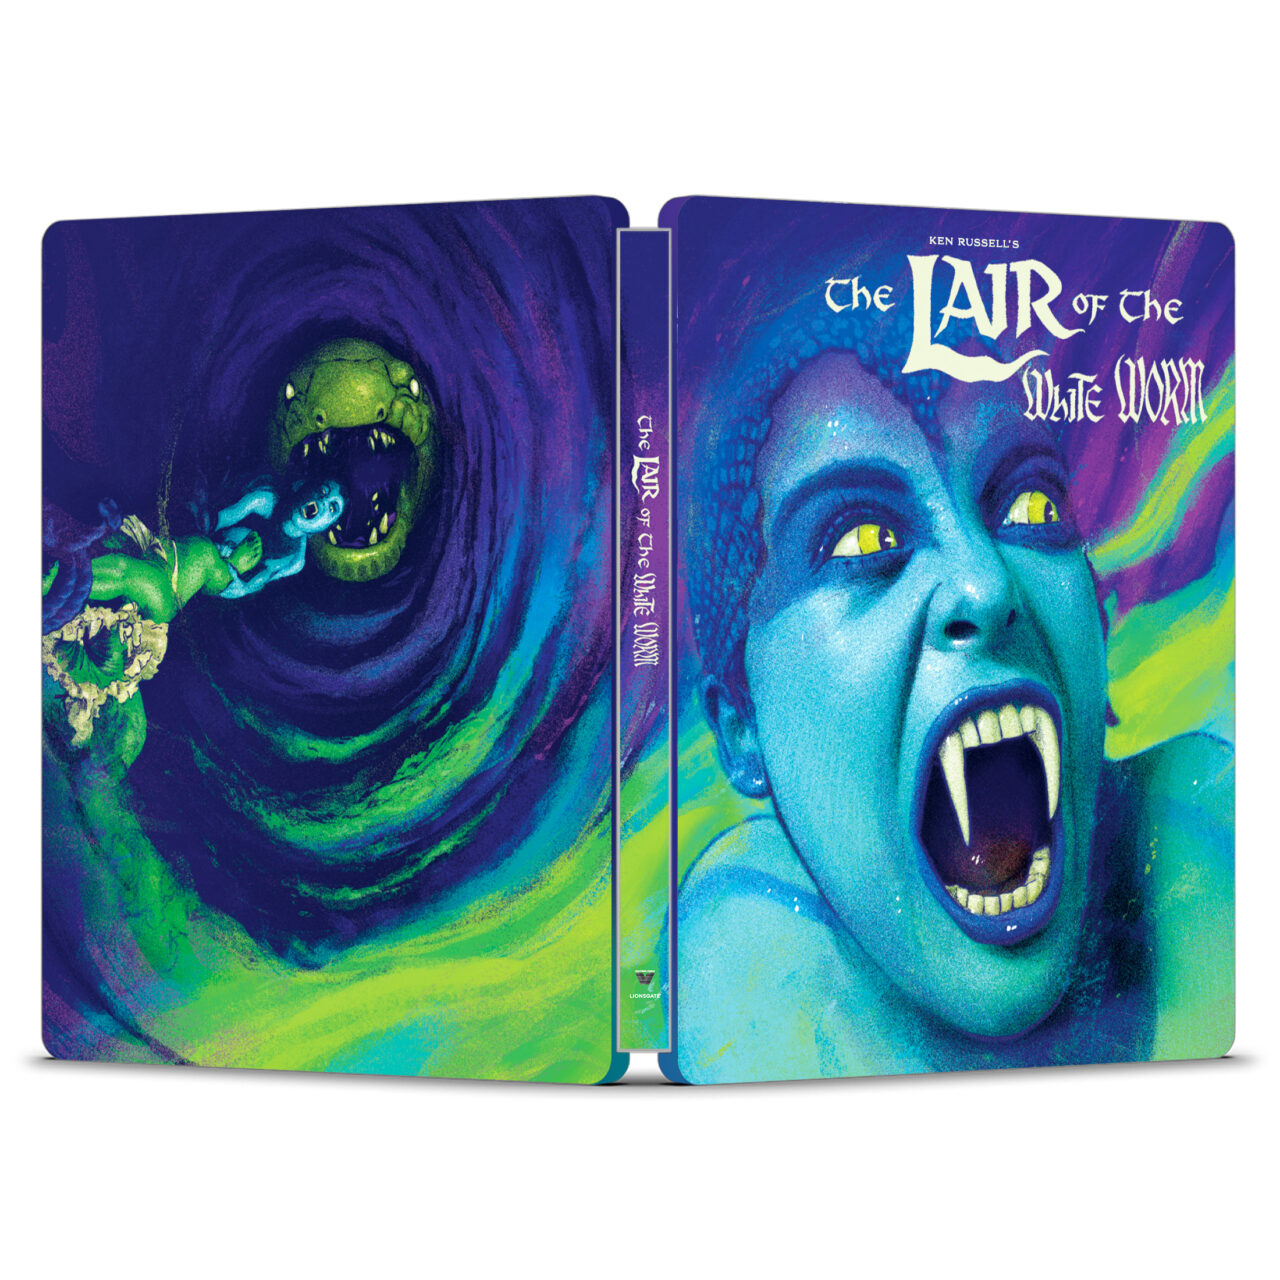 The Lair Of The White Worm Blu-Ray Steelbook cover (Lionsgate)